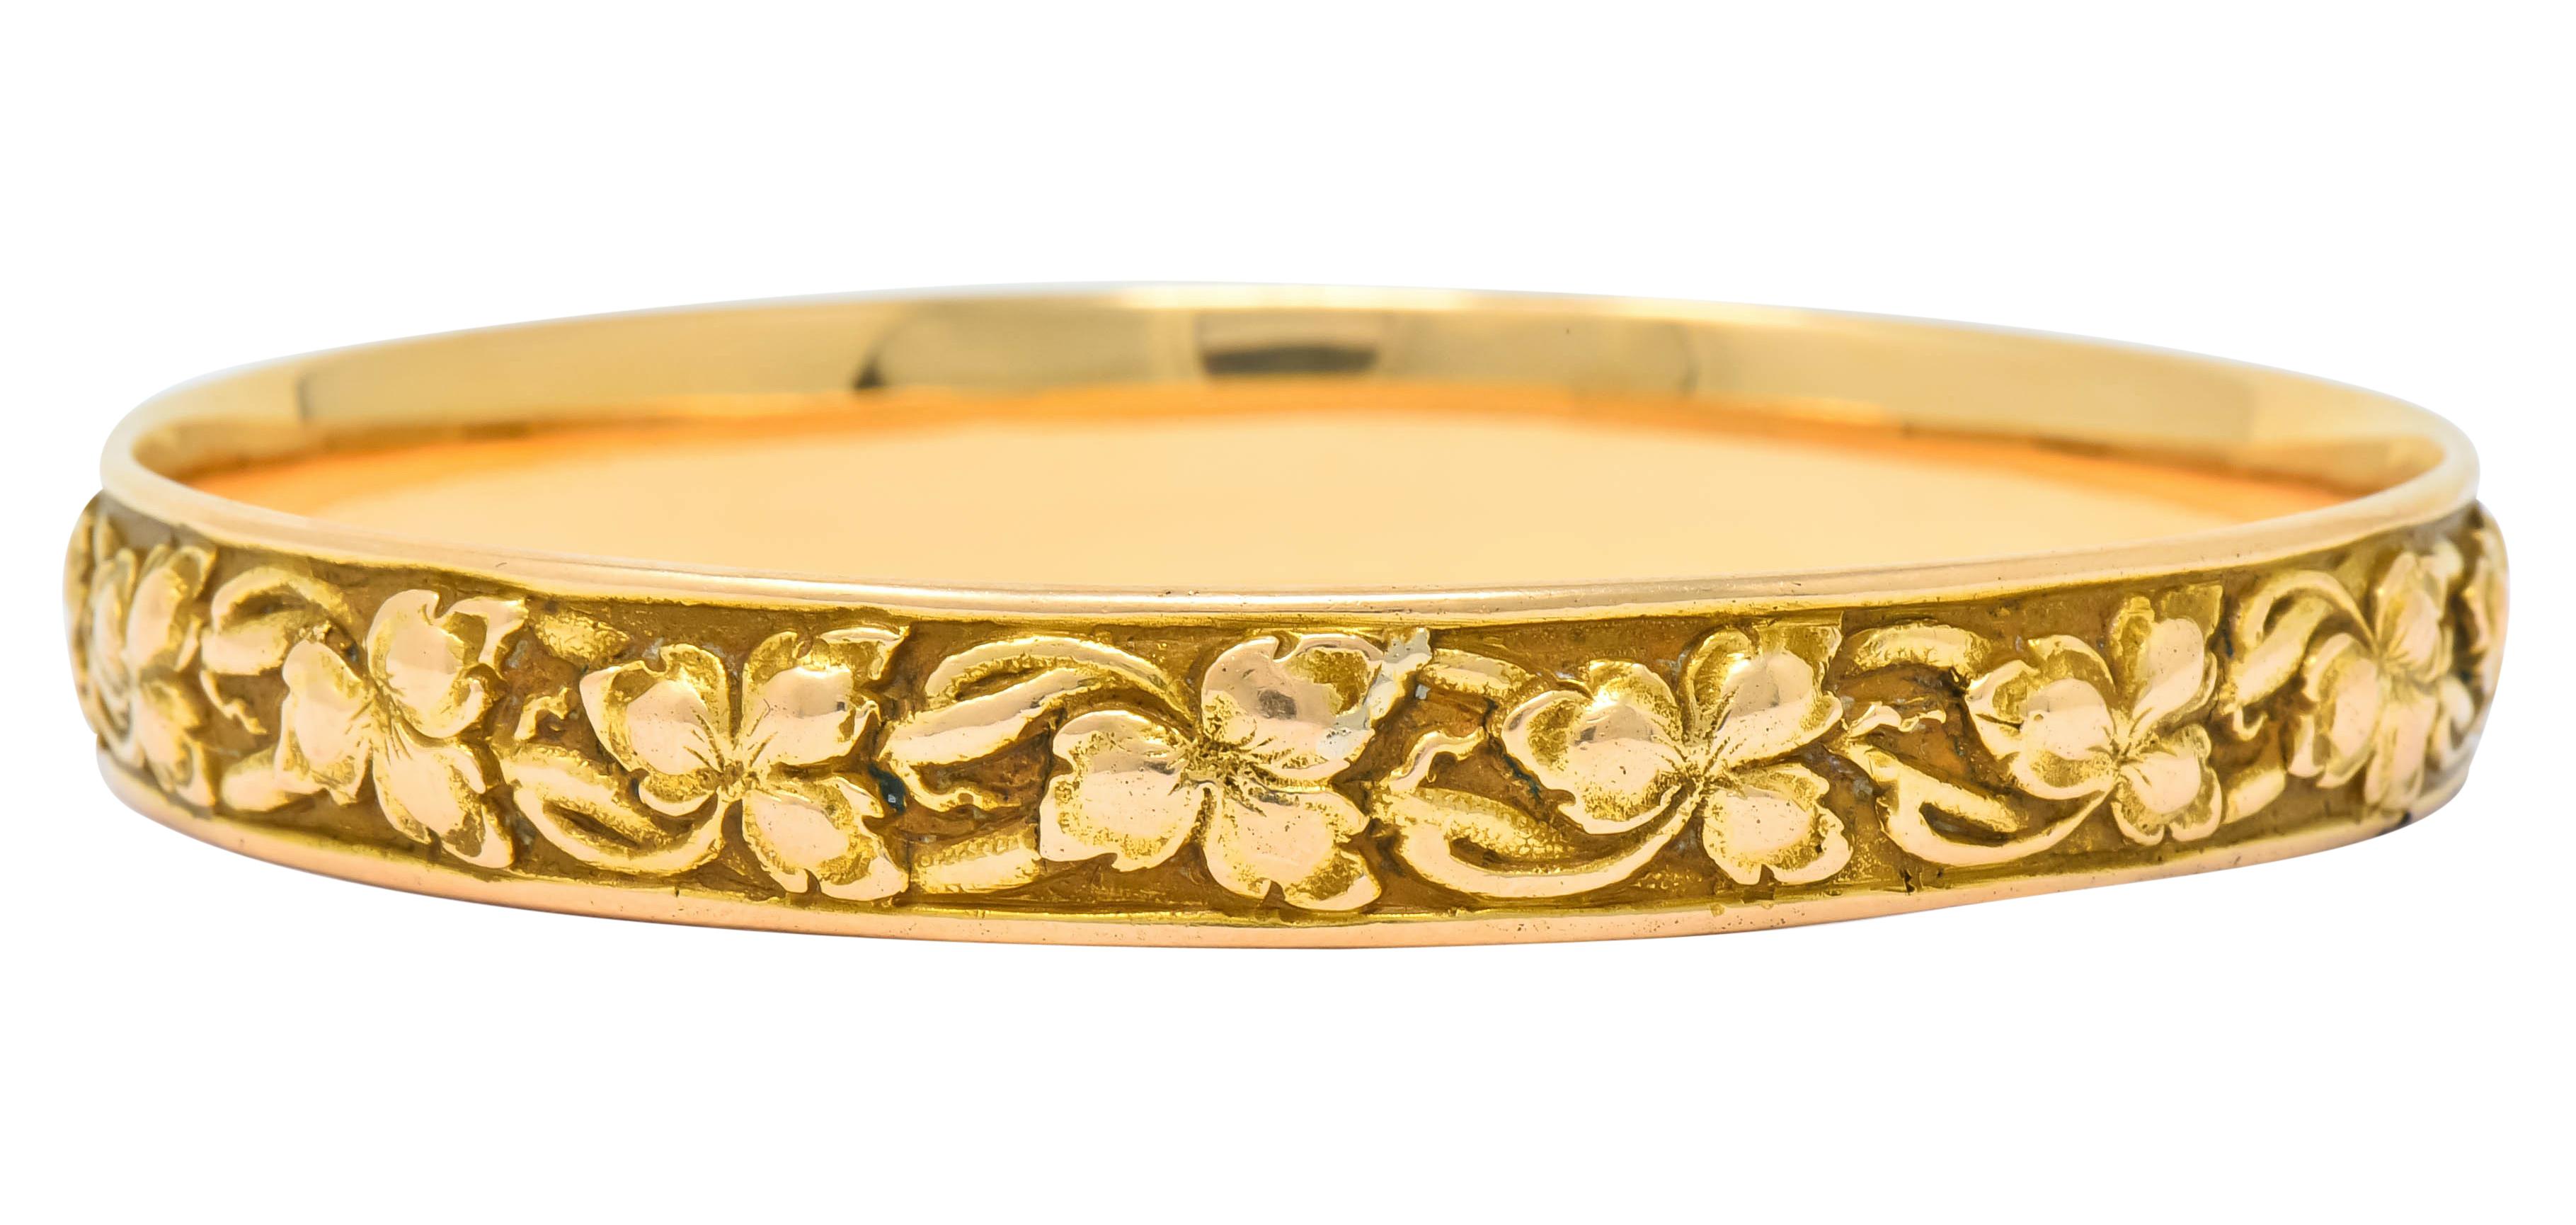 Bangle style bracelet with two polished edges framing a recessed matte gold channel

Channel decorated with highly rendered, polished, crawling ivy motif

Fully signed Shreve & Co. and stamped 14k for 14 karat gold

Inner circumference: 7 3/4